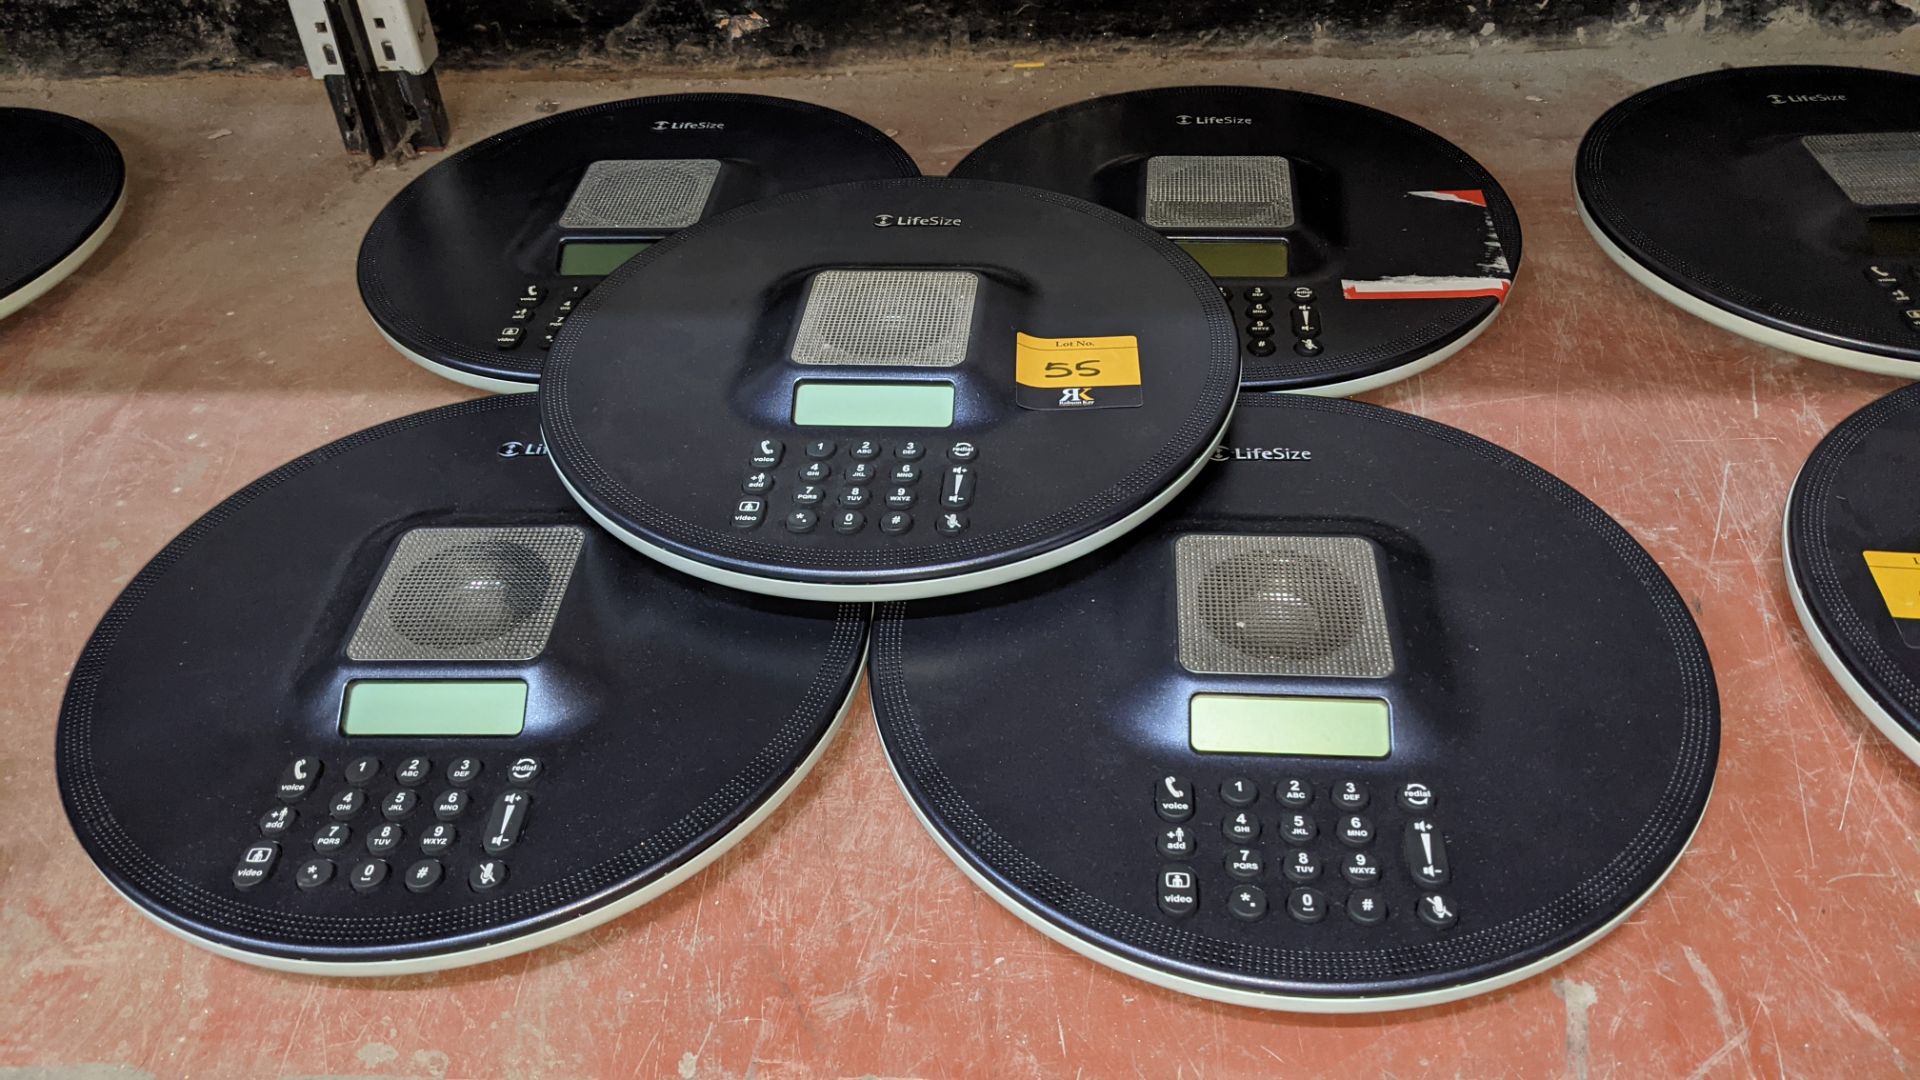 5 off LifeSize phones. NB lots 46 - 47, 53 - 57 & 88 all consist of LifeSize equipment - Image 2 of 9